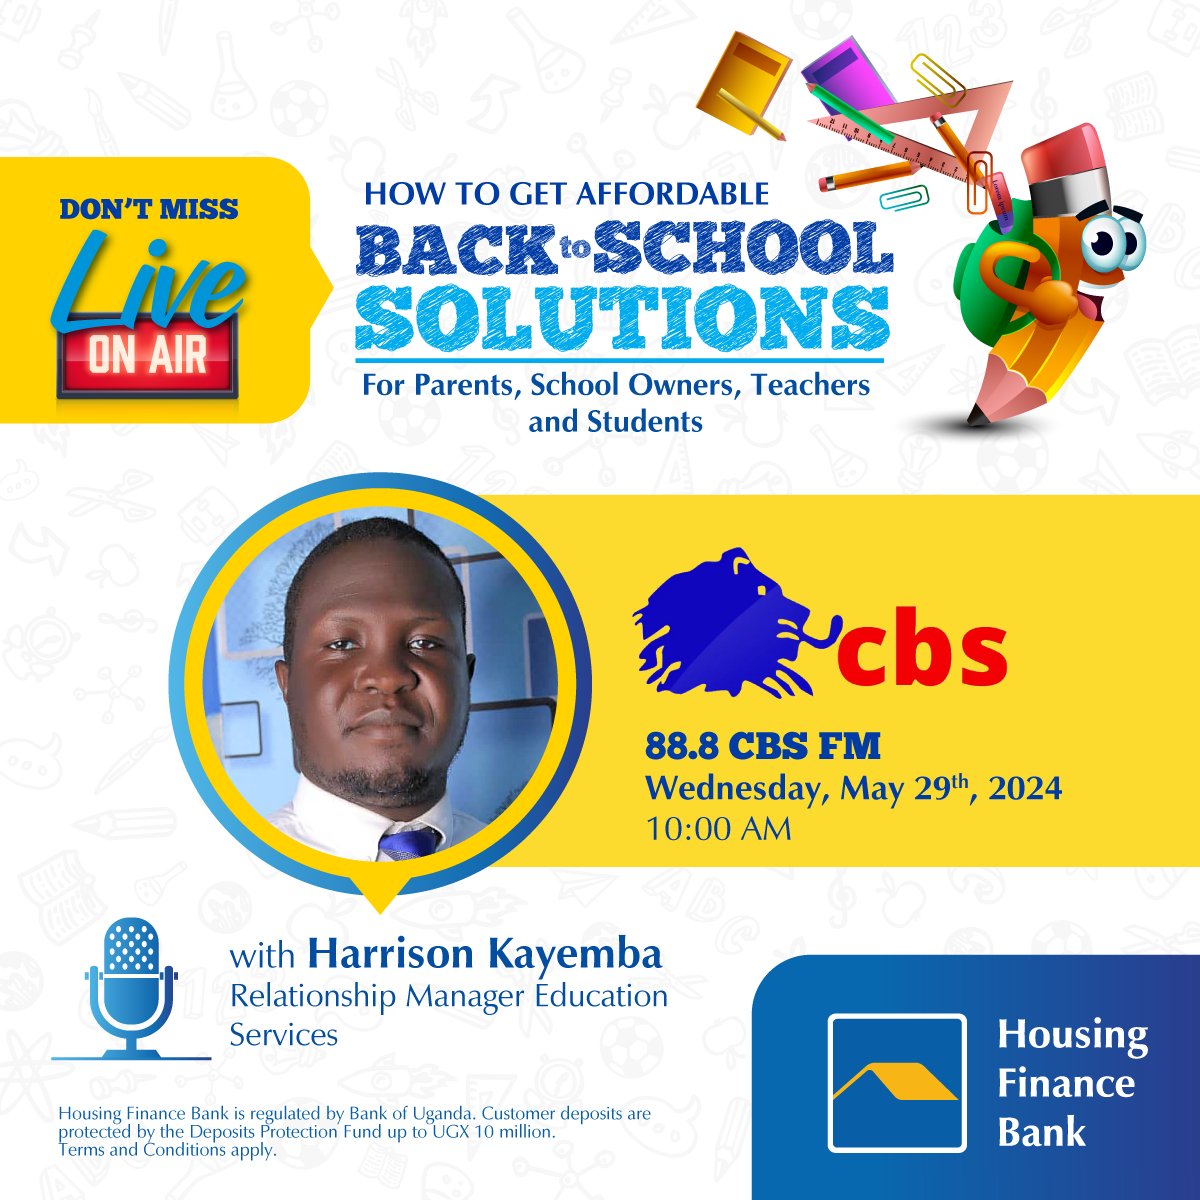 Tune in live tomorrow, Wednesday 29th May 2024, on 88.8 FM CBS Radio Buganda at 10:00 AM, as our Relationship Manager Education Services, Harrison Kayemba, discusses how you can get affordable back-to-school solutions with Housing Finance Bank.